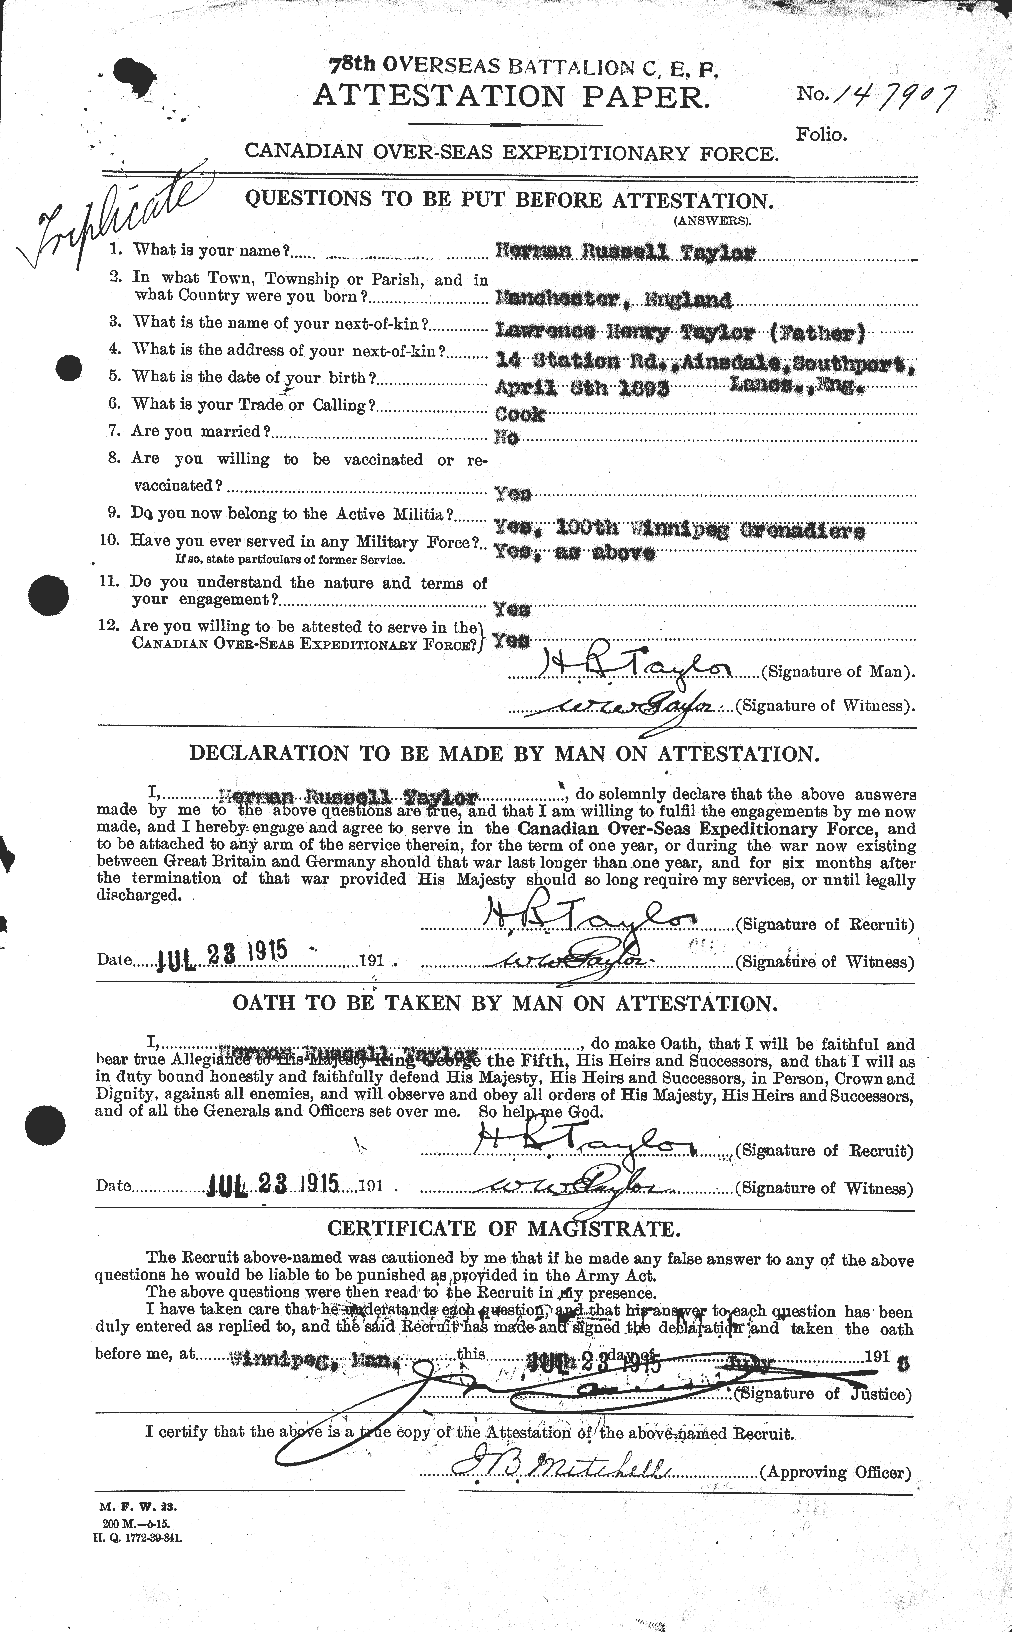 Personnel Records of the First World War - CEF 626585a